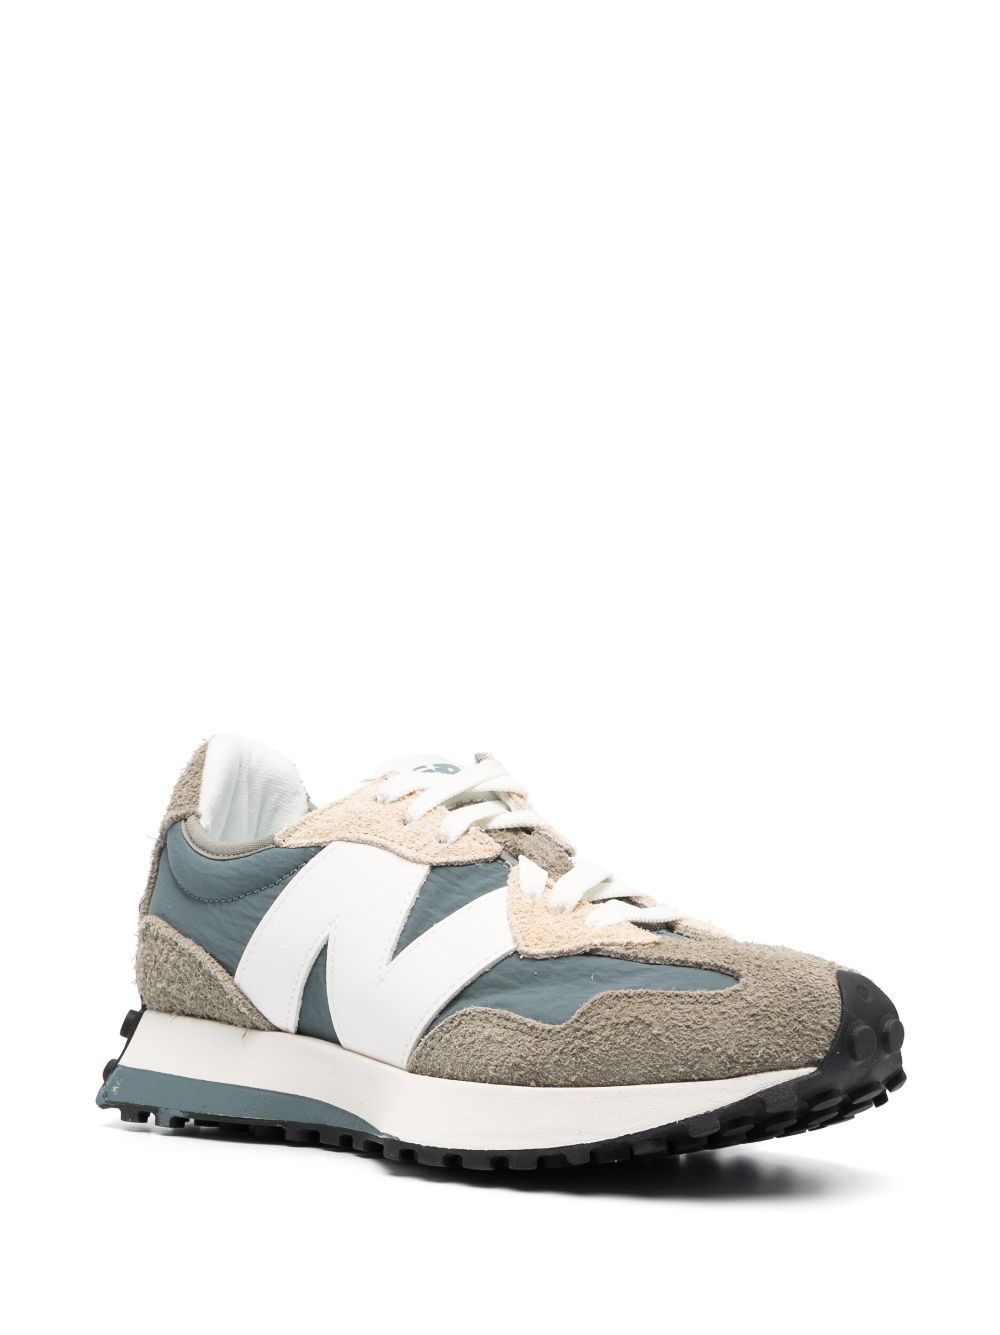 New Balance 327 low-top sneakers - Green/White/Teal/Black